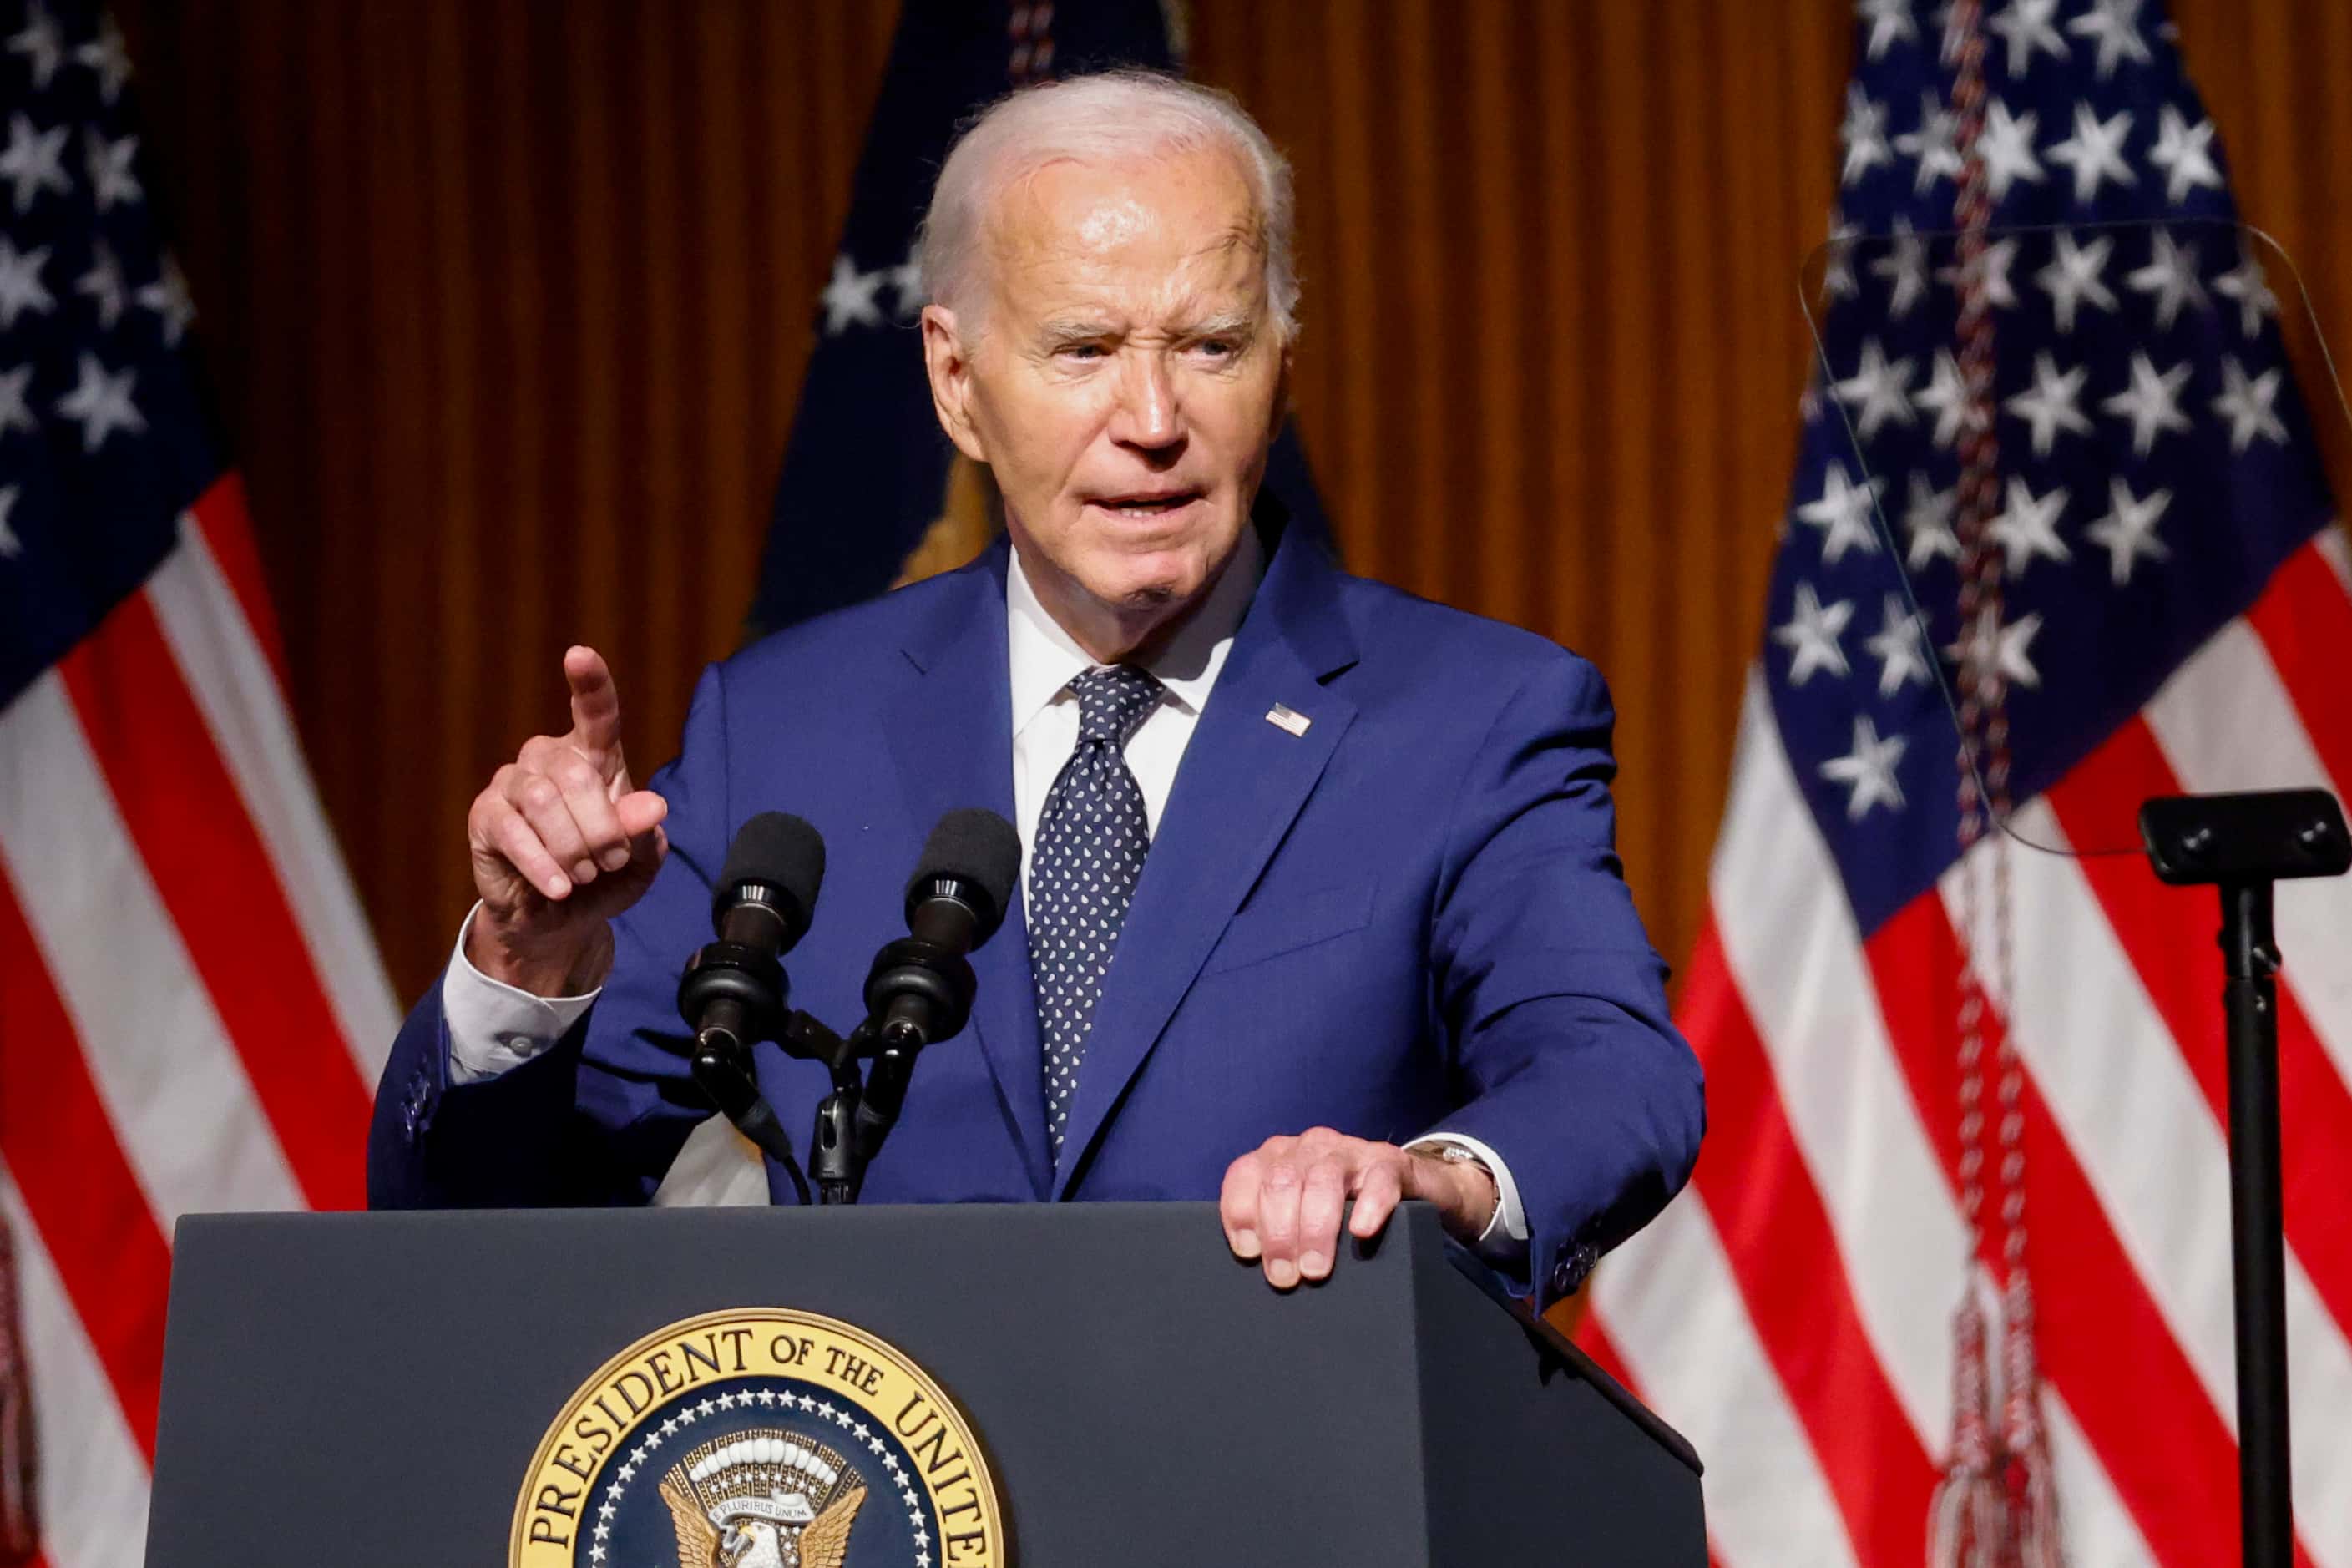 President Joe Biden gives remarks during an event commemorating the 60th anniversary of the...